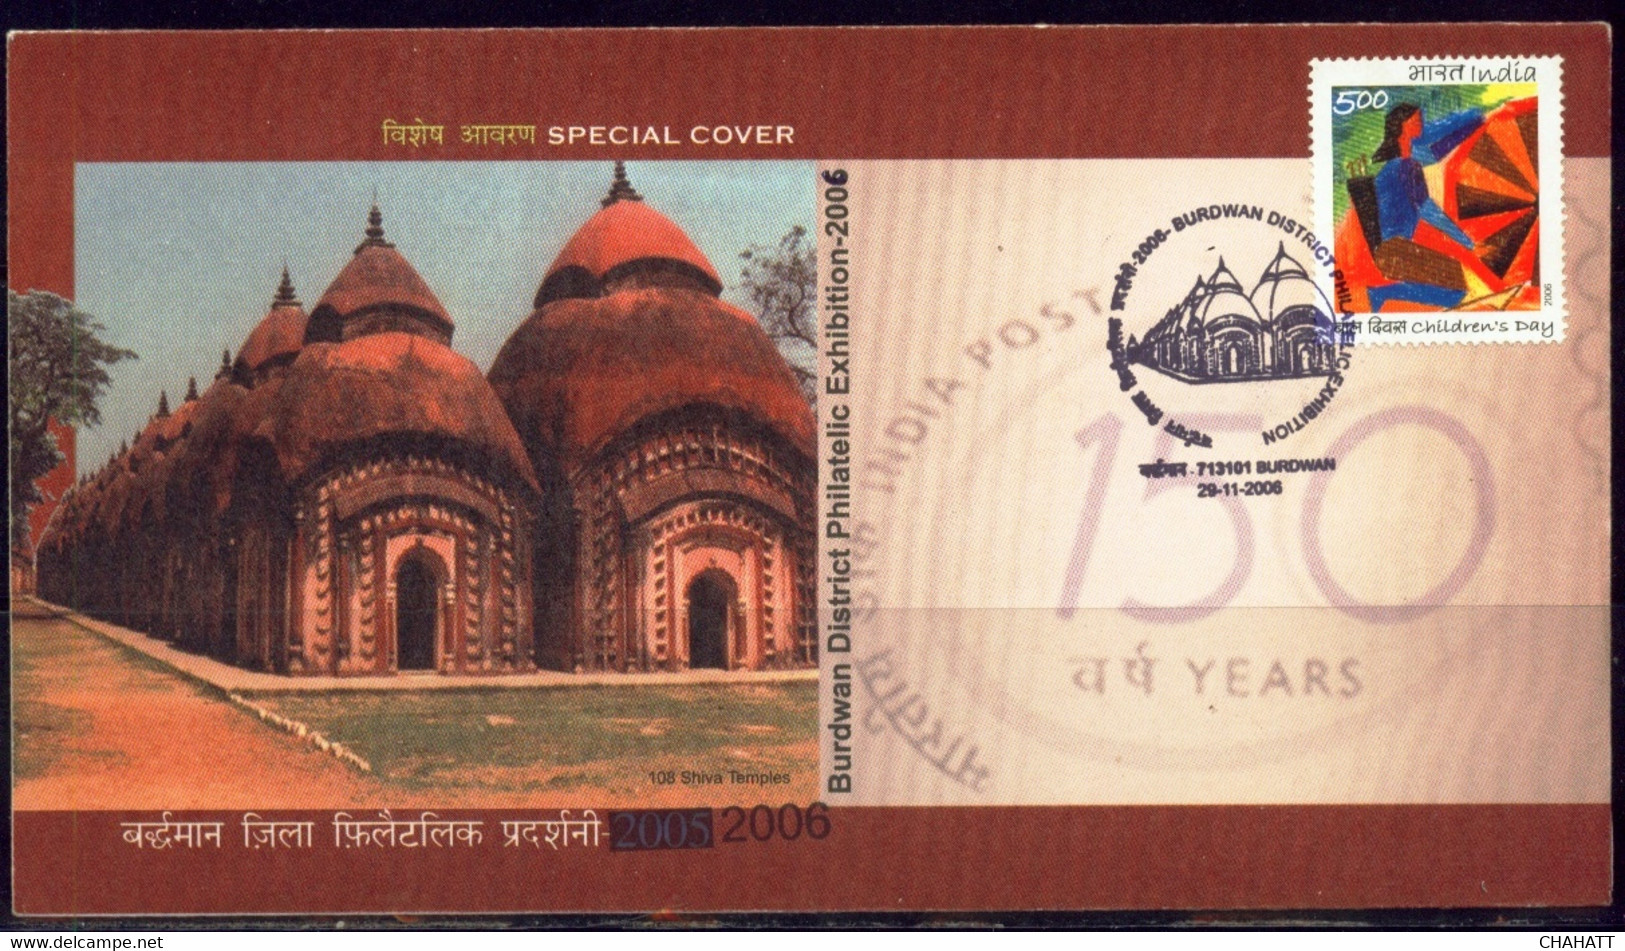 HINDUISM- LORD SHIVA- TERRACOTTA TEMPLE-BURDWAN-SPECIAL COVER- PICTORIAL CANCEL-USED-INDIA-2006-BX3-41 - Hindouisme